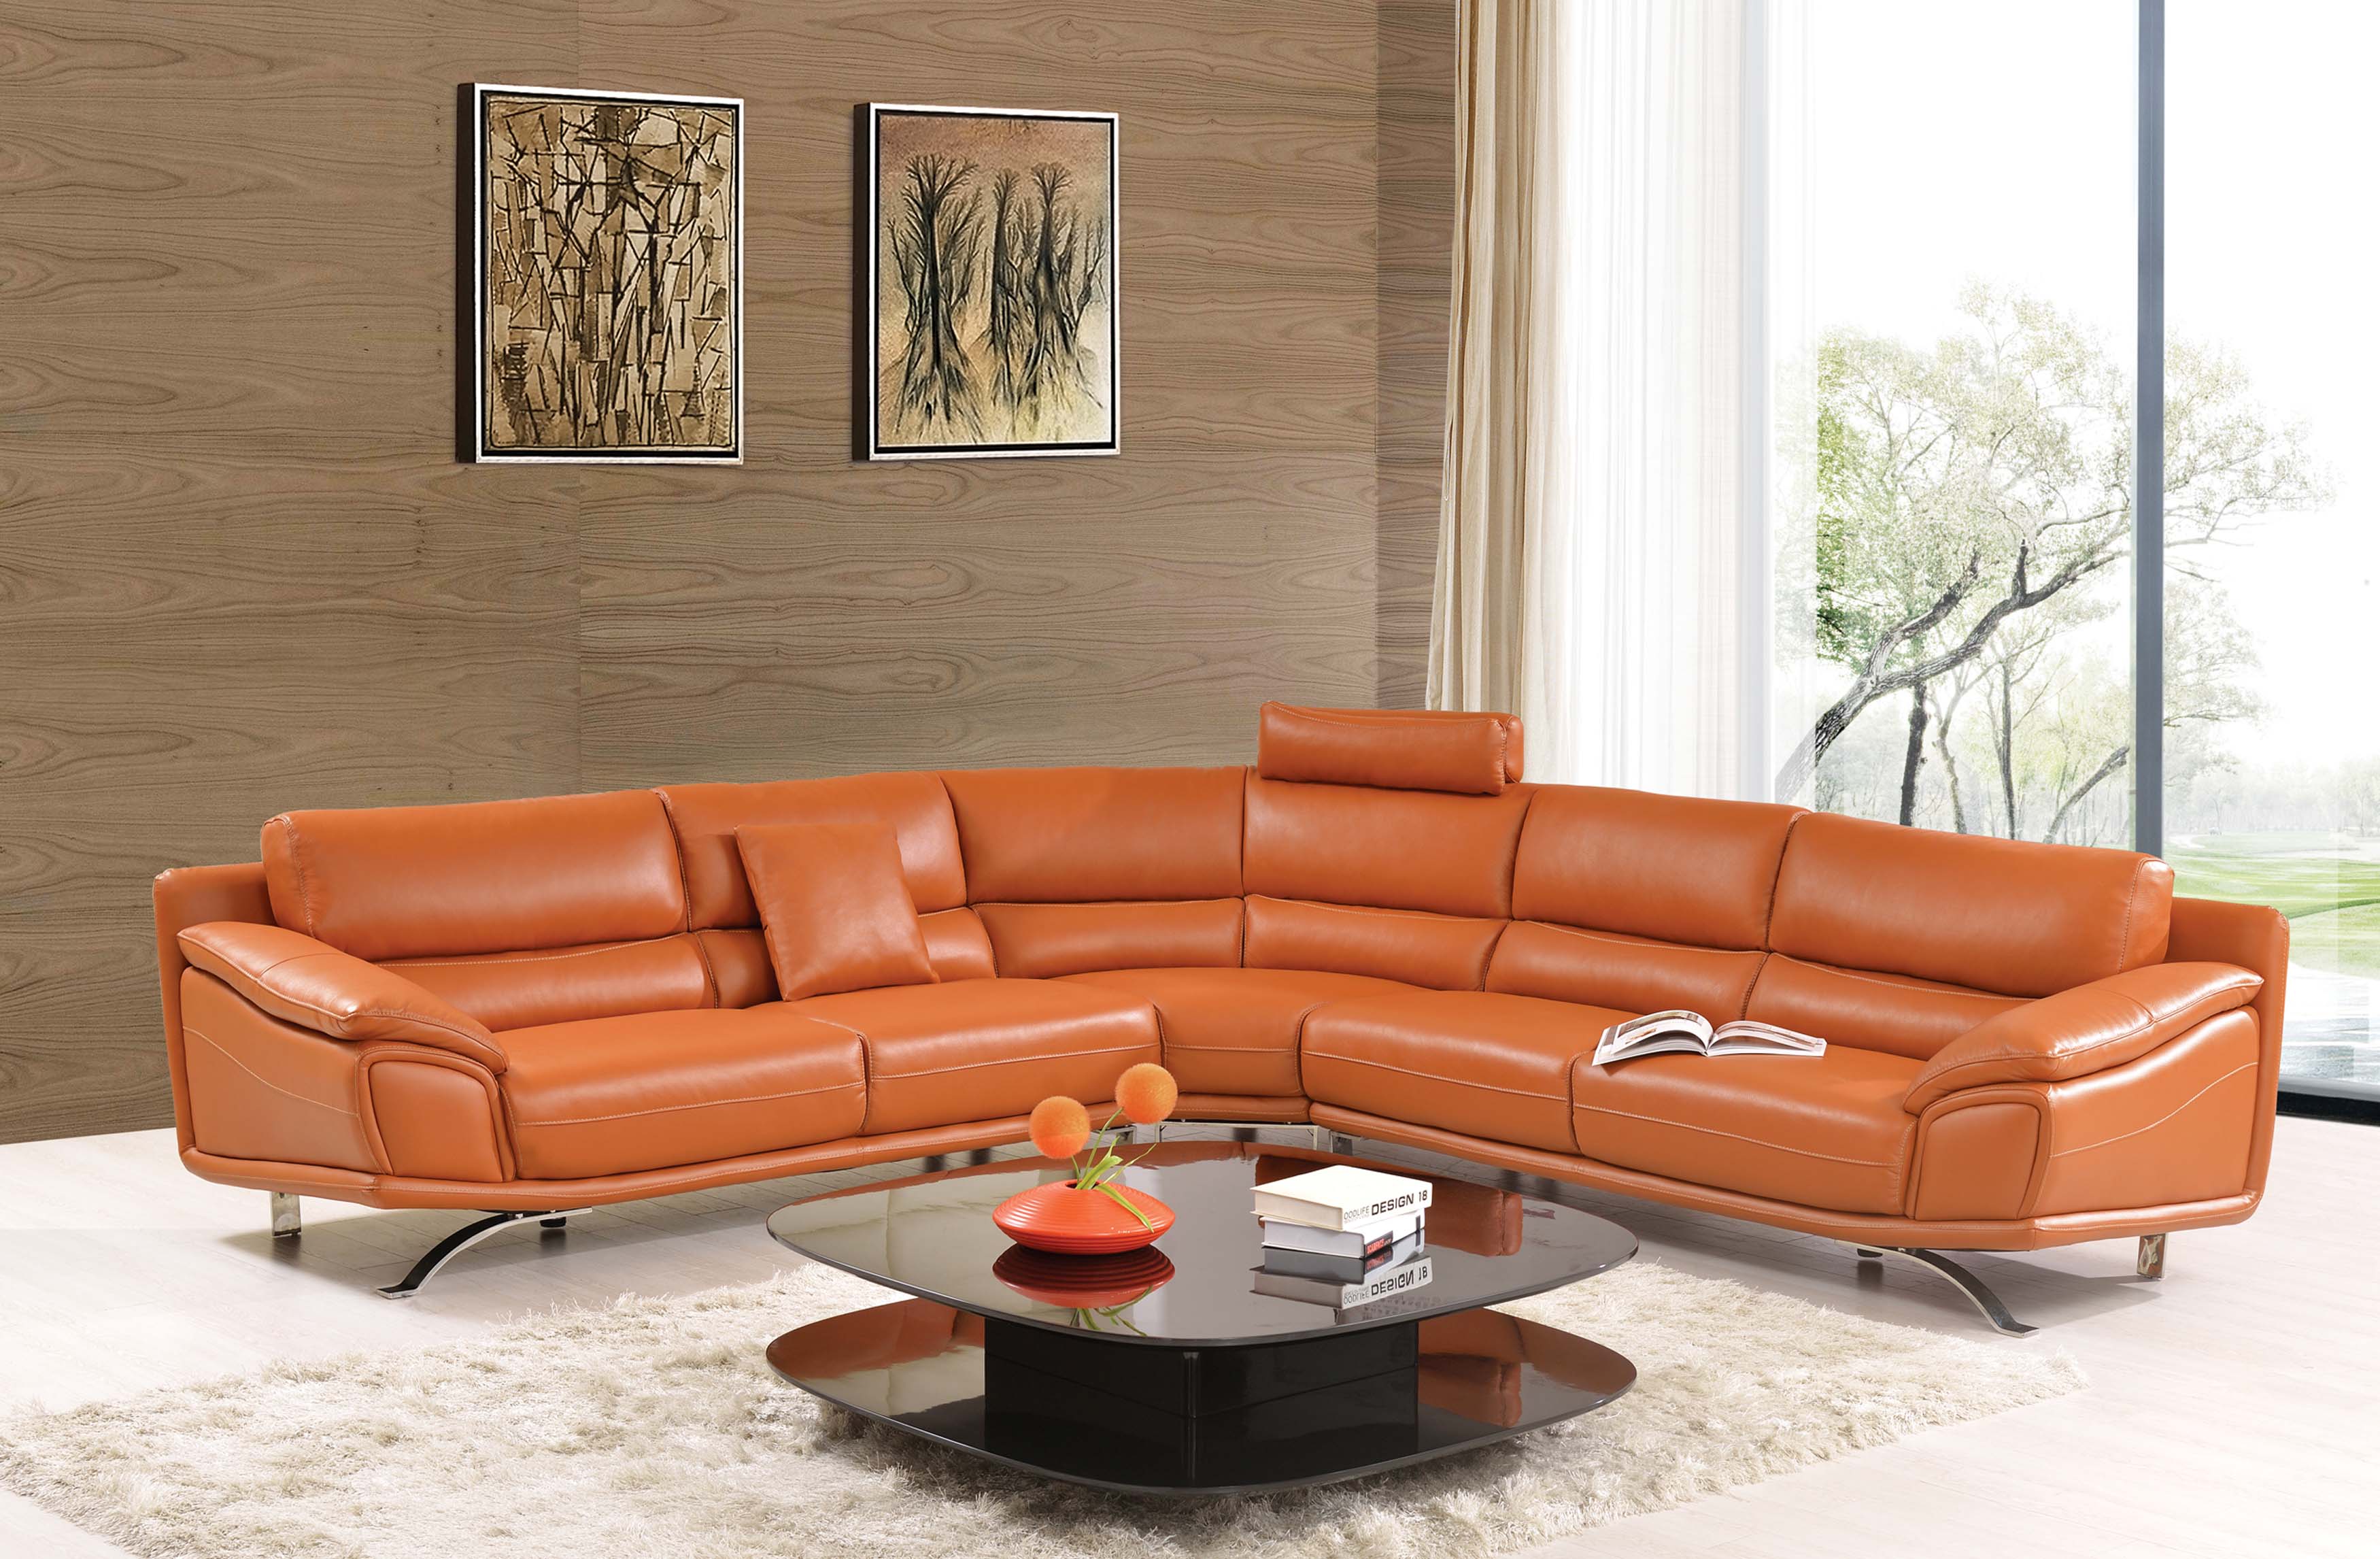 Living Room Furniture Reclining and Sliding Seats Sets 533 Sectional